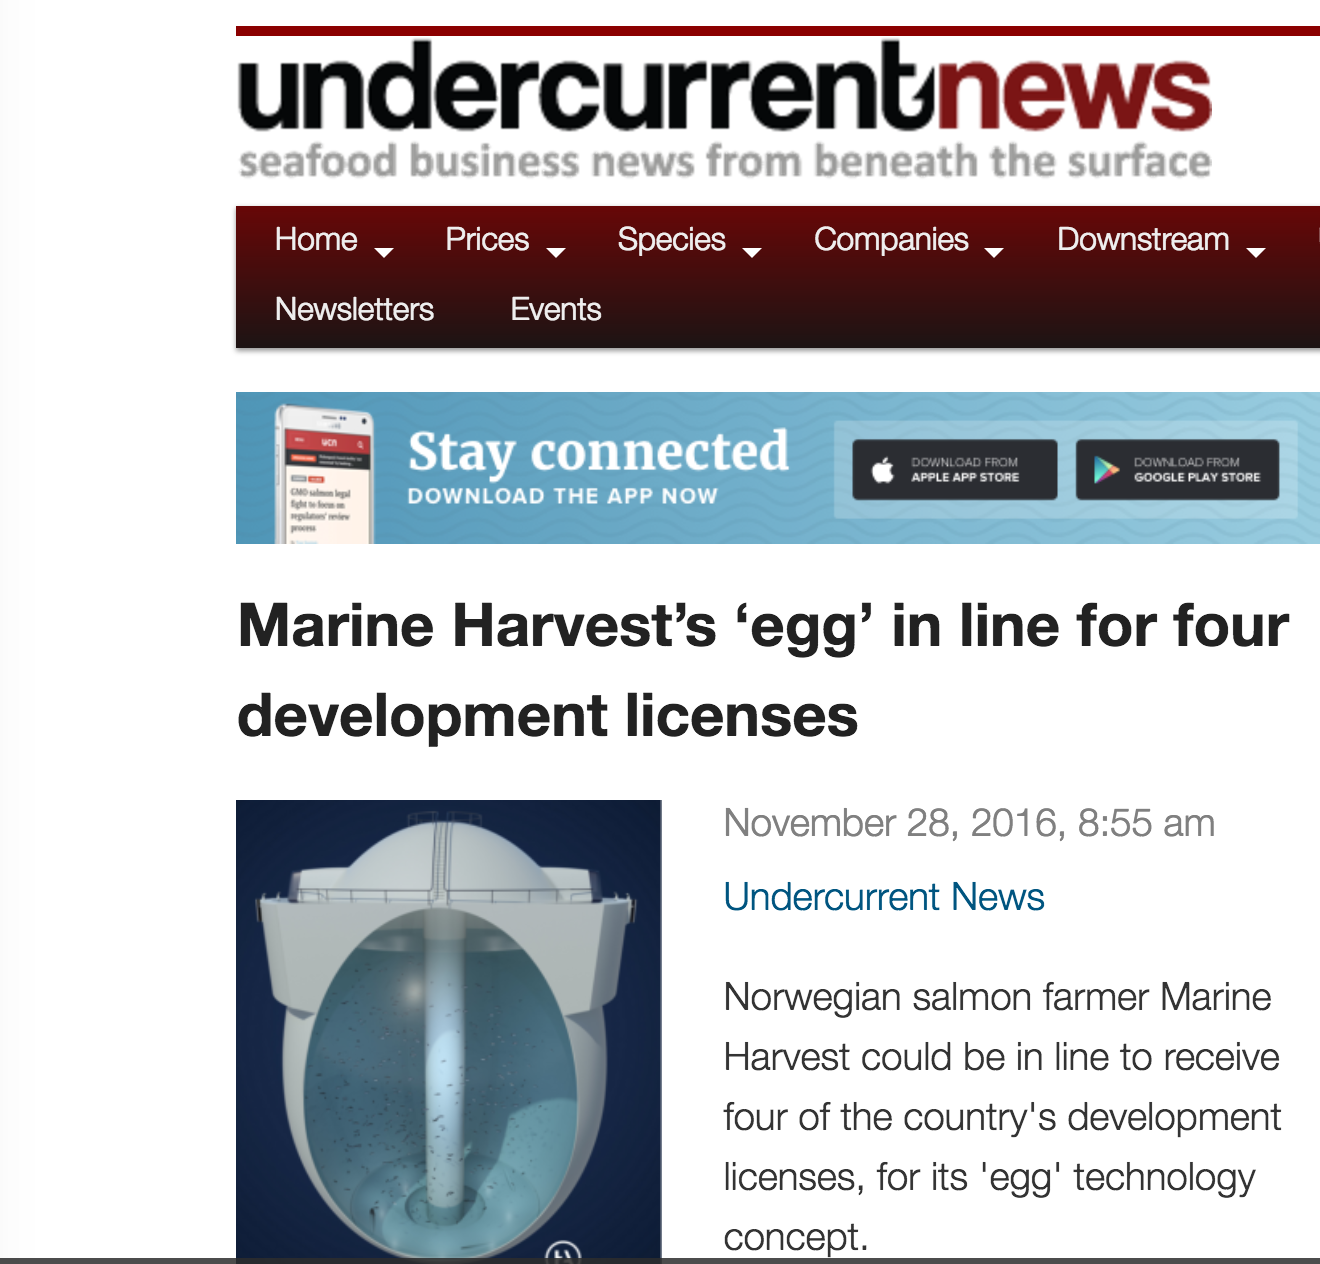 An image featuring Marine Harvest's closed containment system called an egg